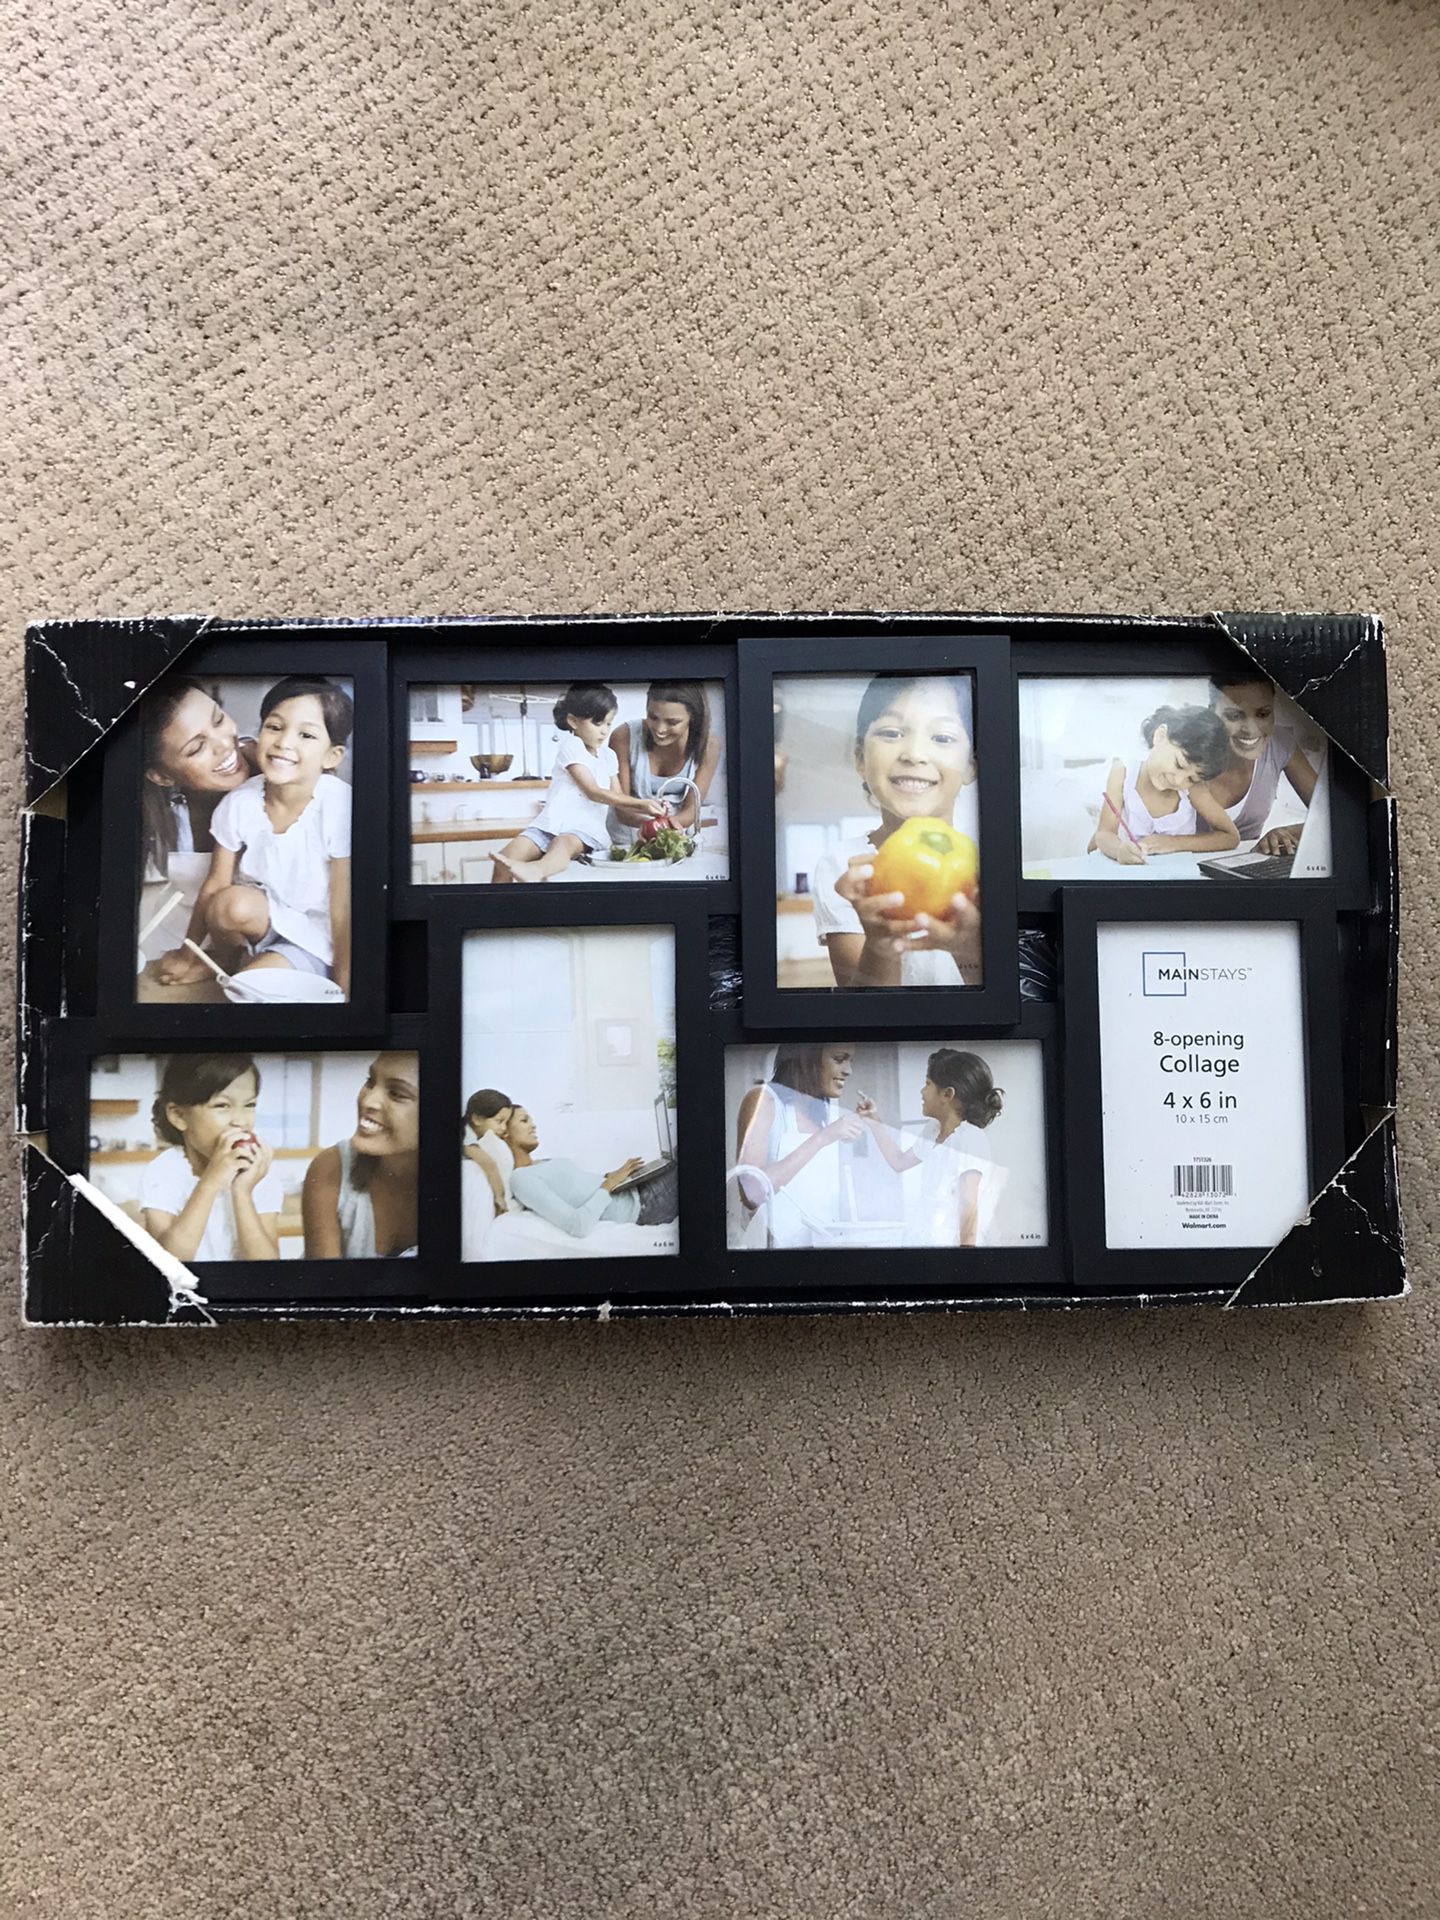 8-opening collage frame 4x6 in each